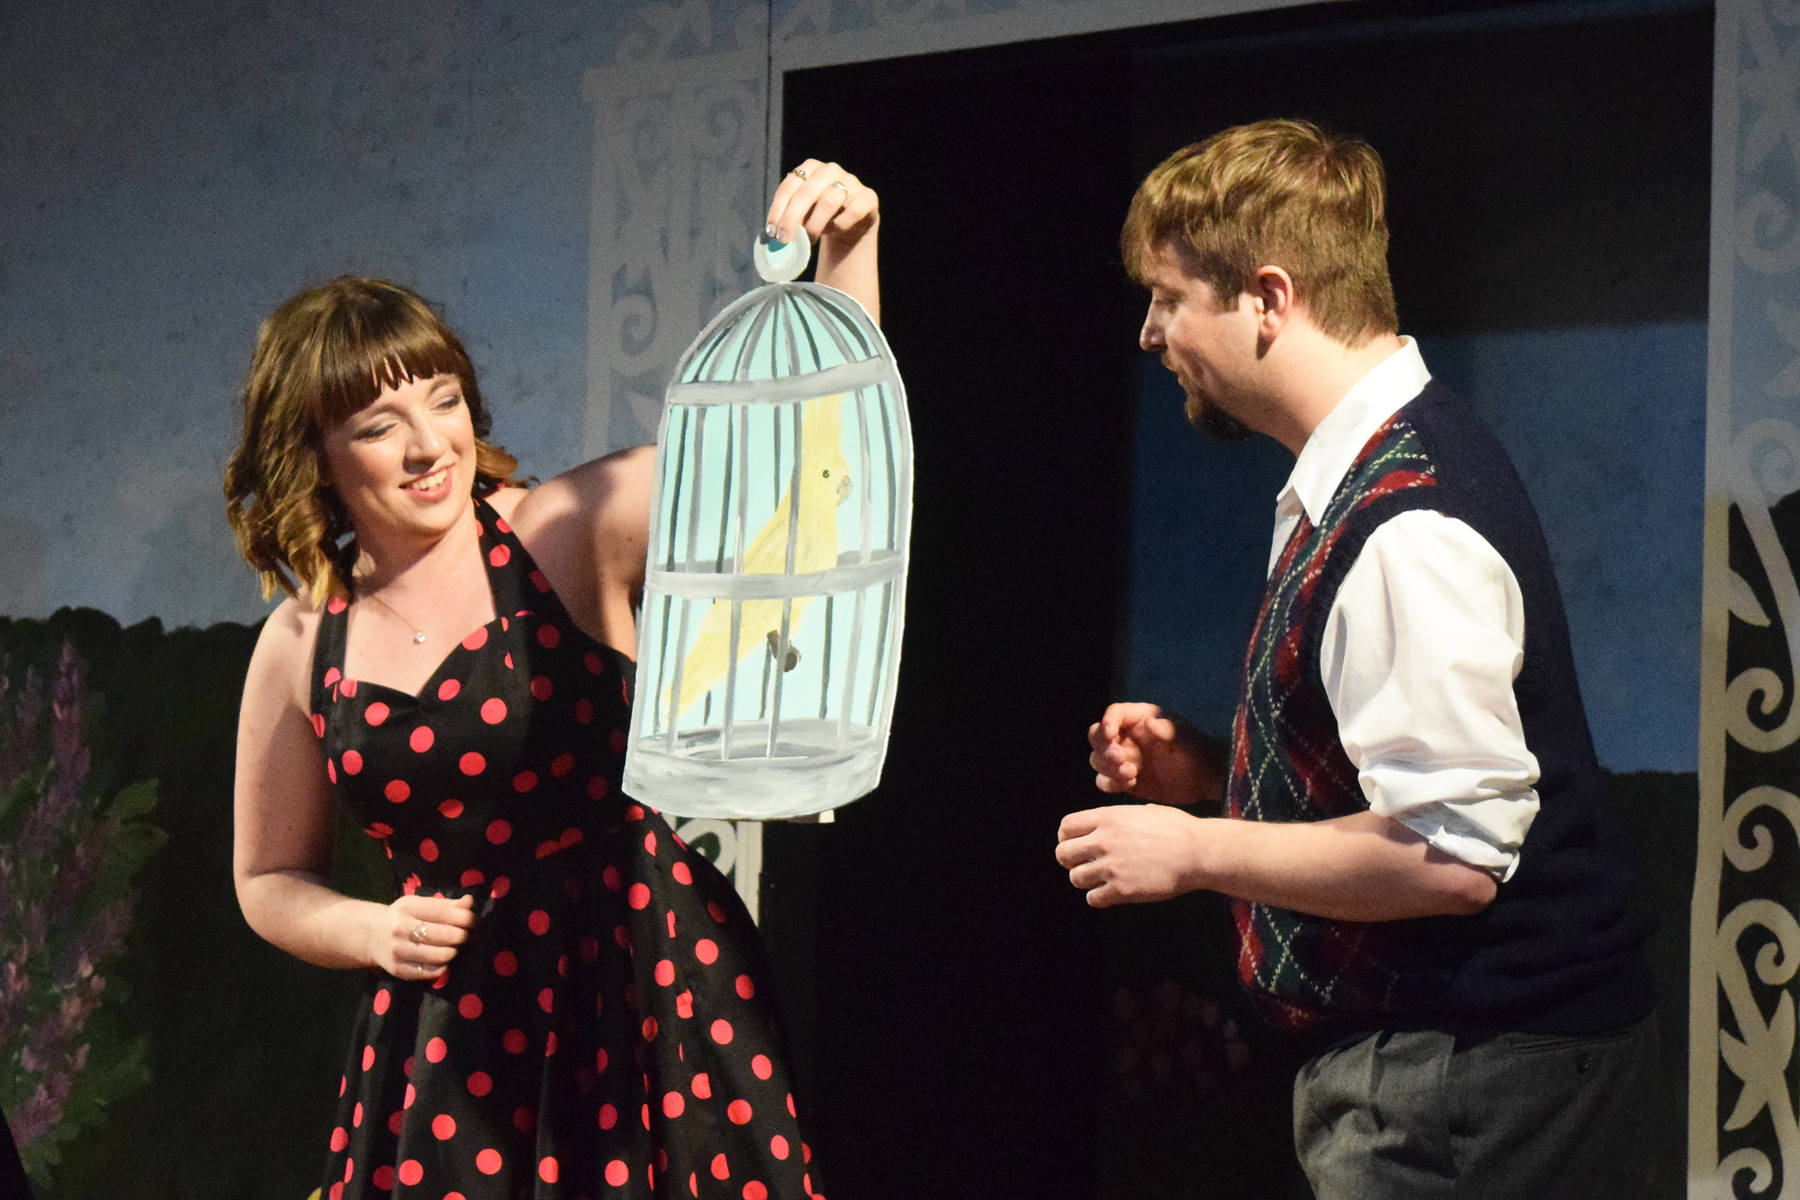 Hannah Tauriainen (left) acts out a scene with Aaron Gordon during rehearsal of Sabrina Fair, Tuesday, May 14, 2019, at Triumvirate North Theater in Kenai, Alaska. (Photo by Joey Klecka/Peninsula Clarion)